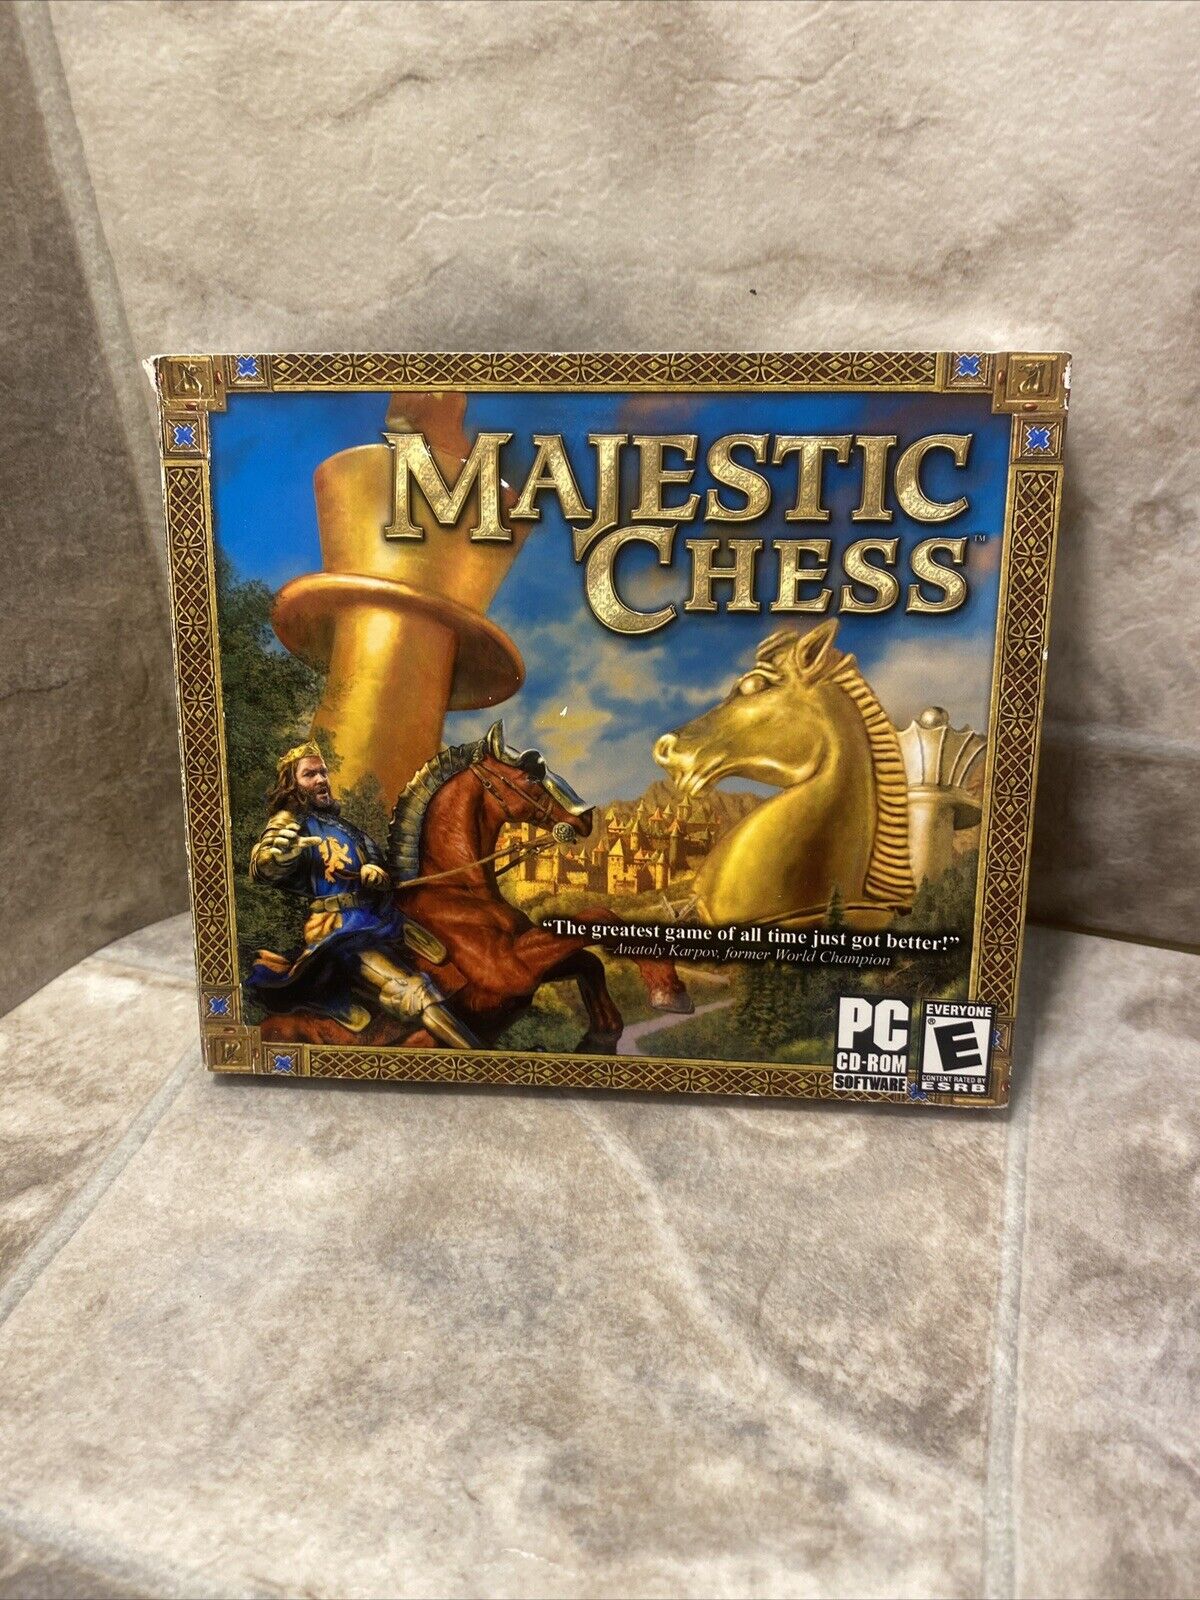 Vintage Majestic Chess pre-owned/Friday Night Bowling New Sealed PC CD-ROM 